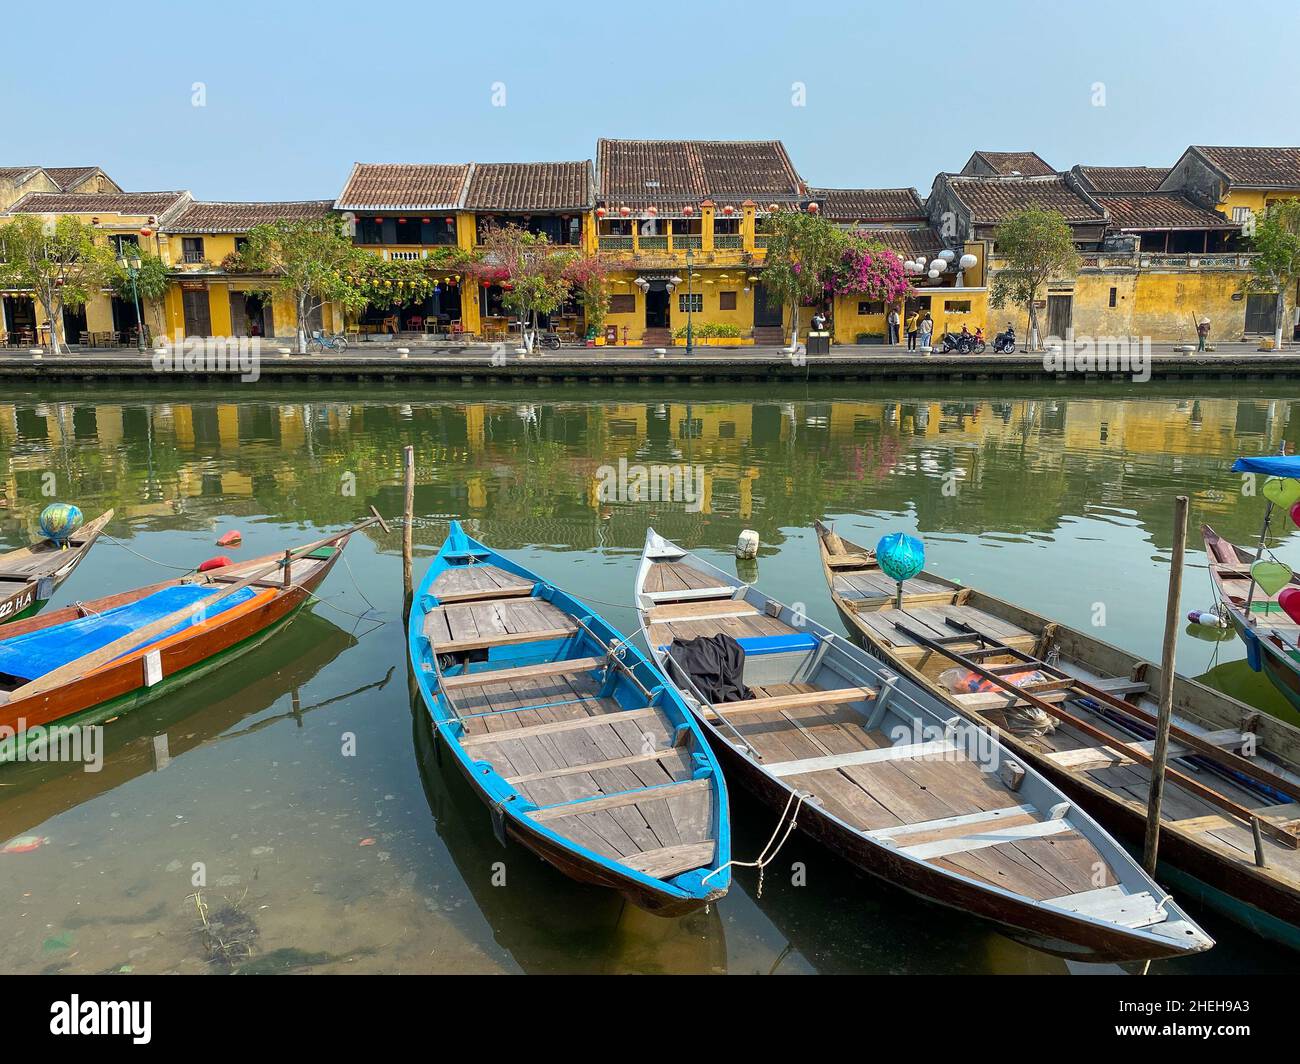 Hoi An, Vietnam - Mar 12, 2020. View of Hoi An ancient town in Quang Nam, Vietnam. Hoi An used to be a busy port town since the 15th century. Stock Photo